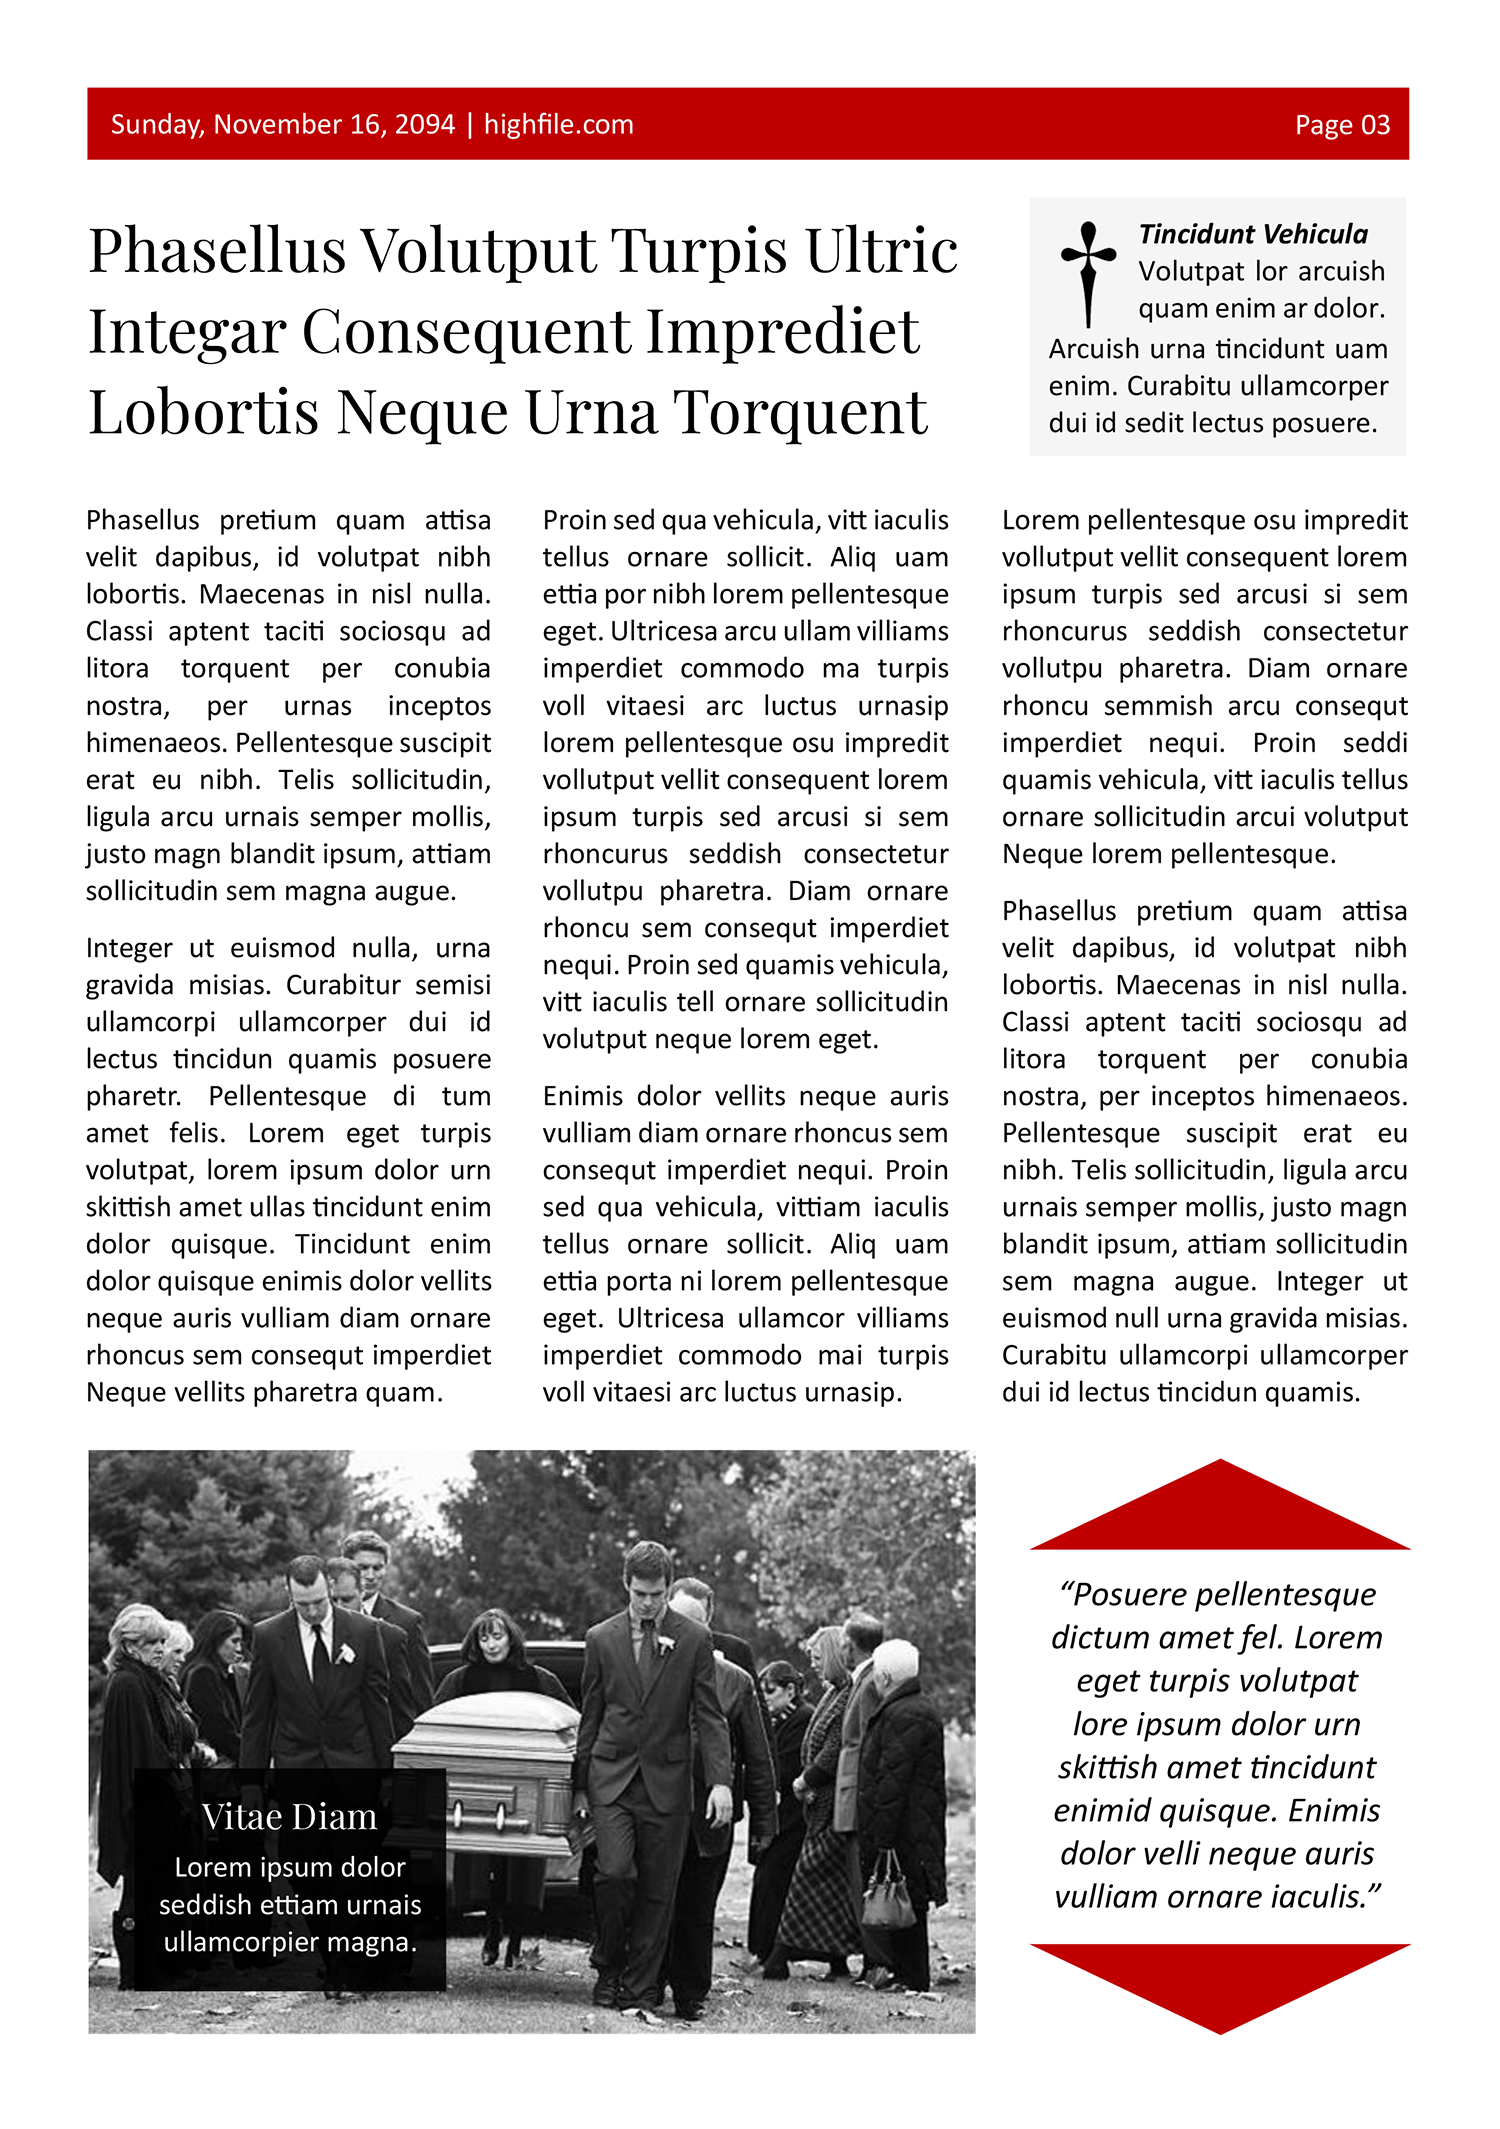 Red Newspaper Obituary Page Template - Page 03